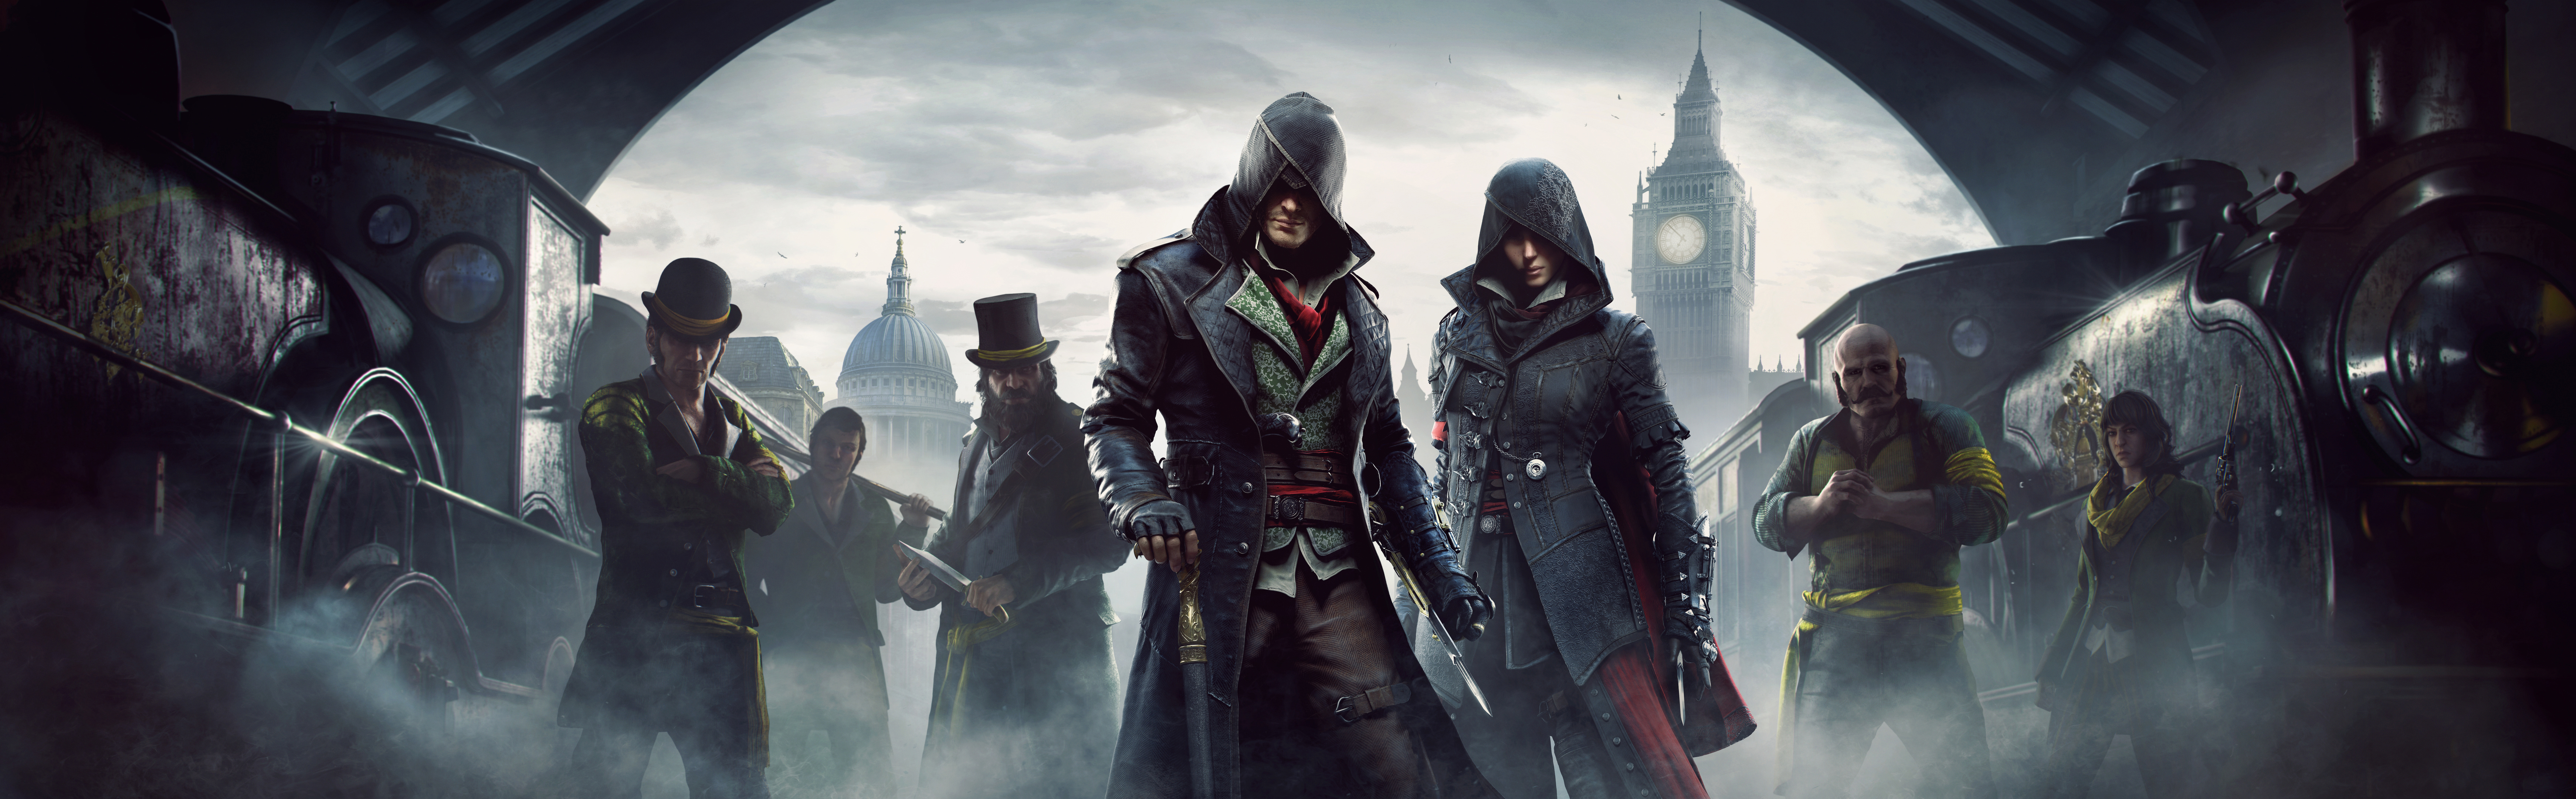 assassin's creed: syndicate, assassin's creed, video game, evie frye, jacob frye Smartphone Background